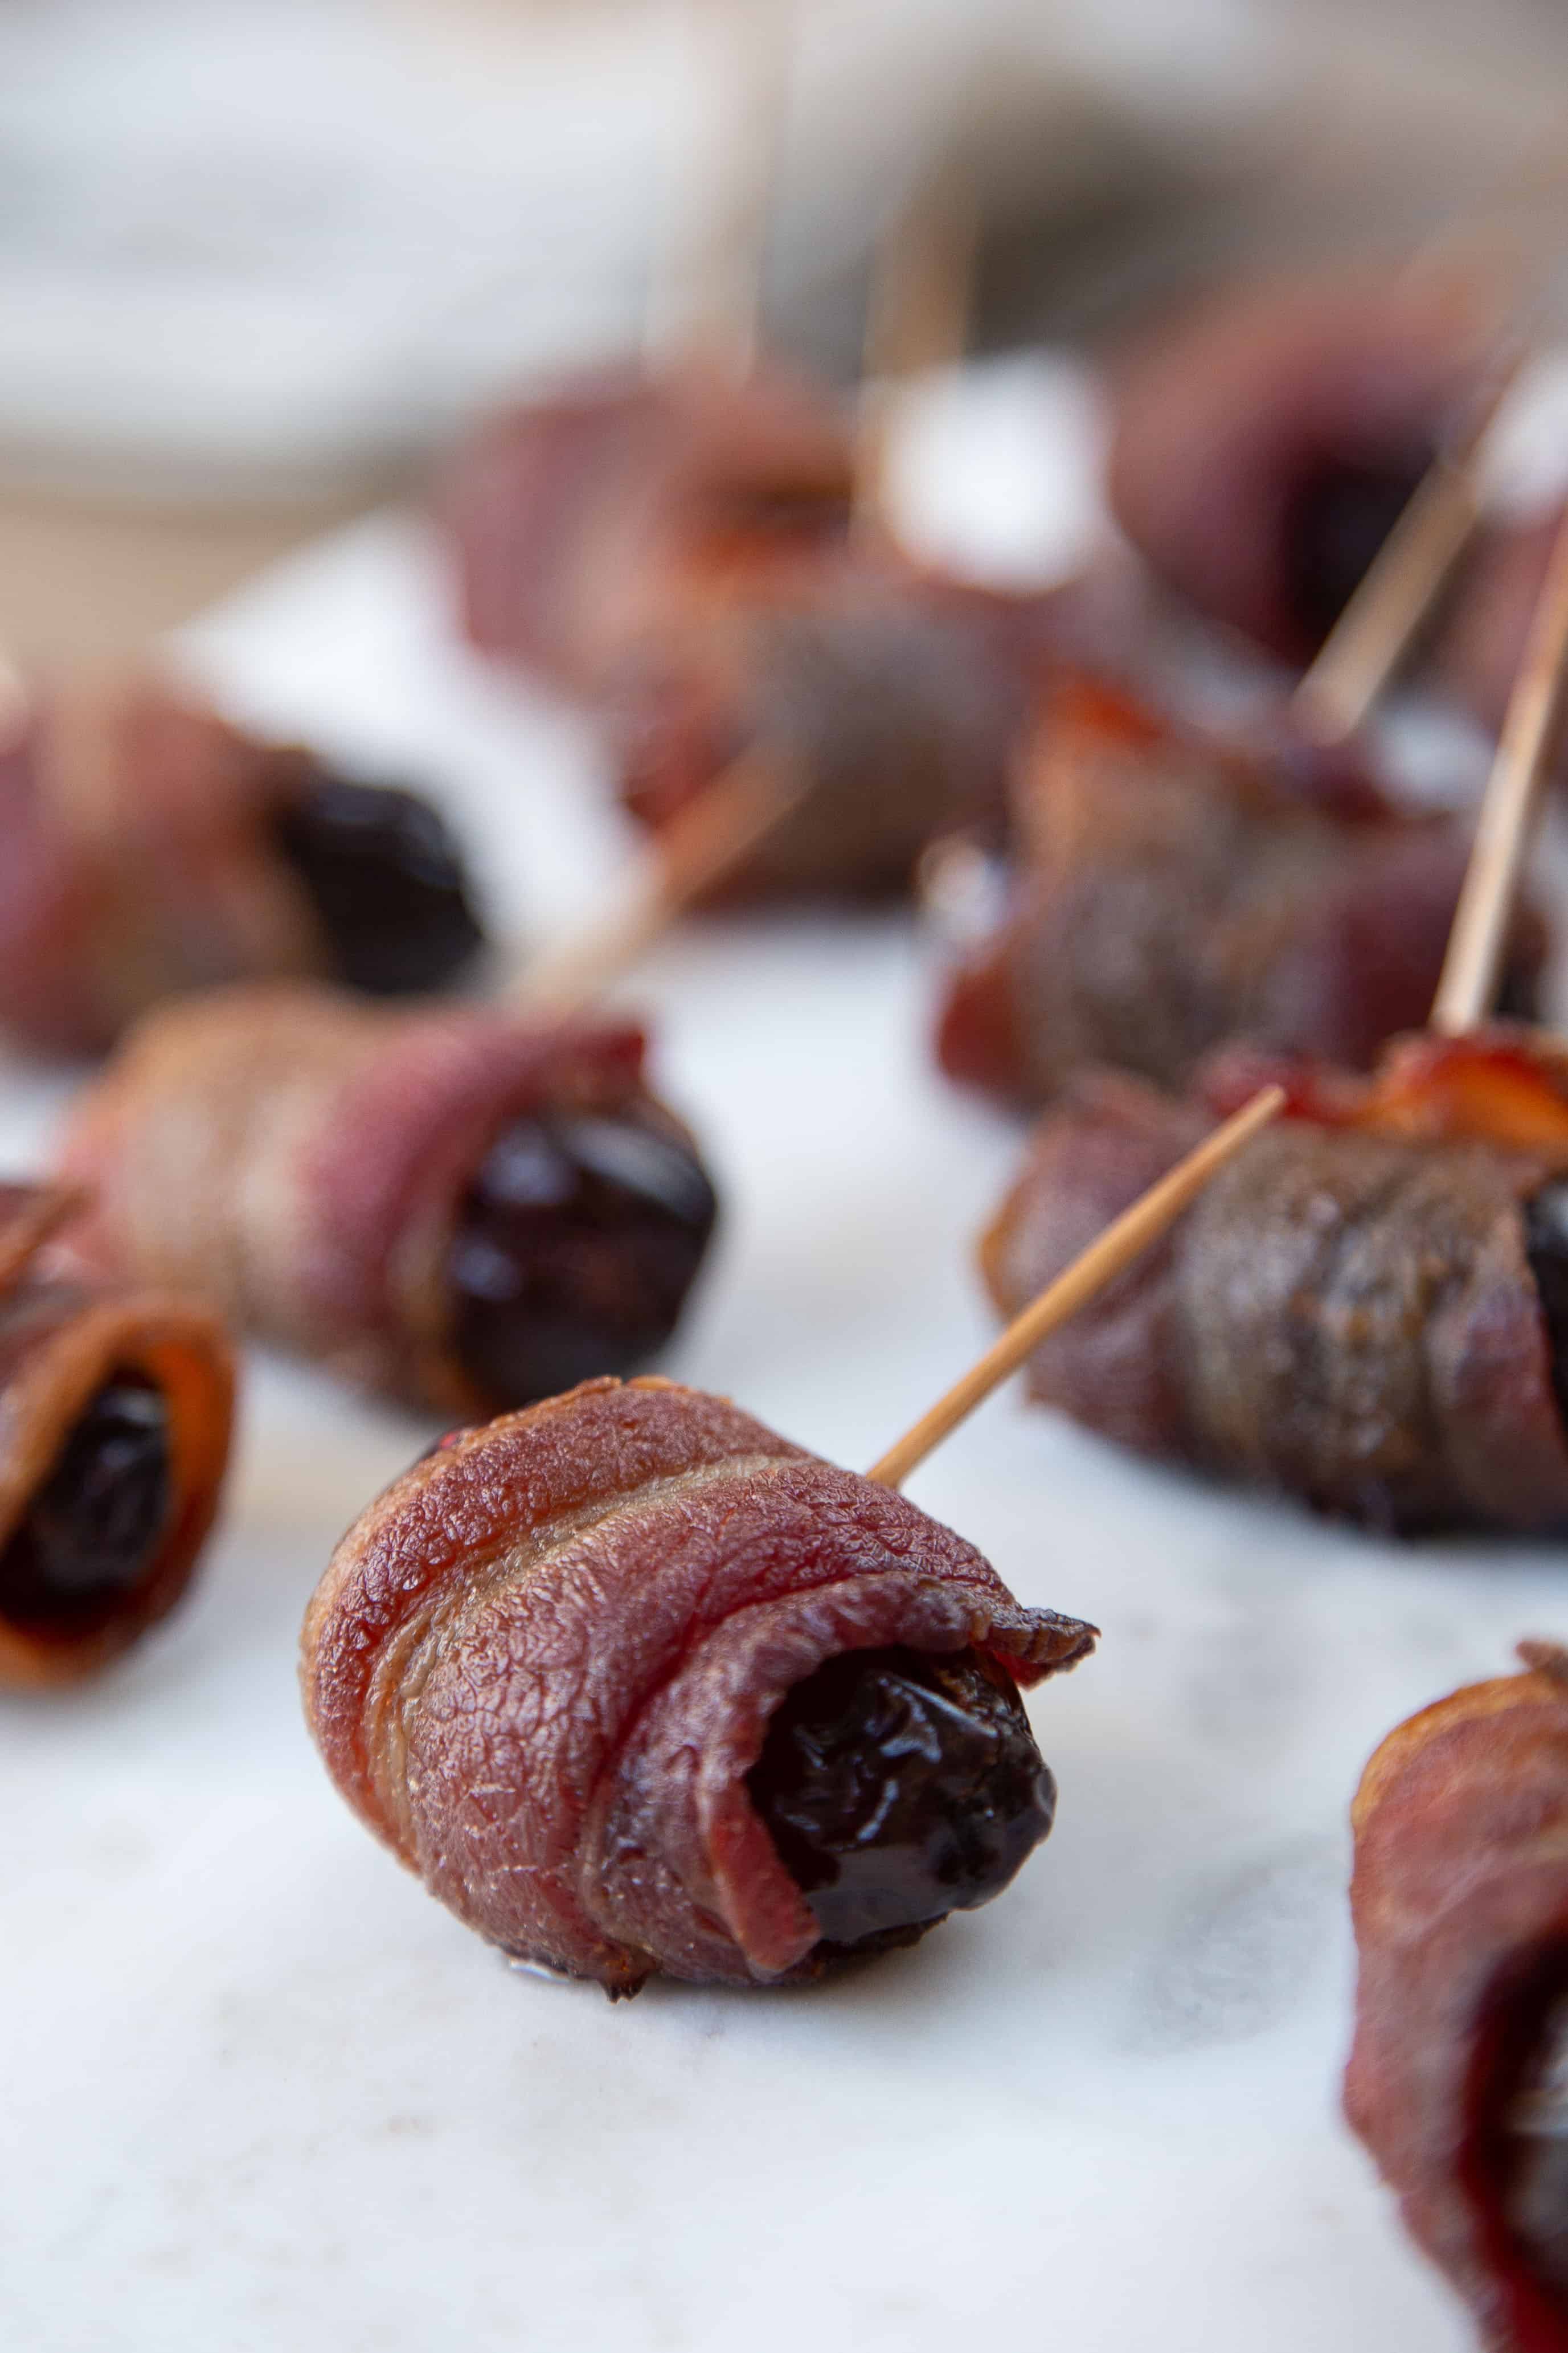 bacon wrapped dates with toothpicks stuck in them, sitting on white parchment paper.